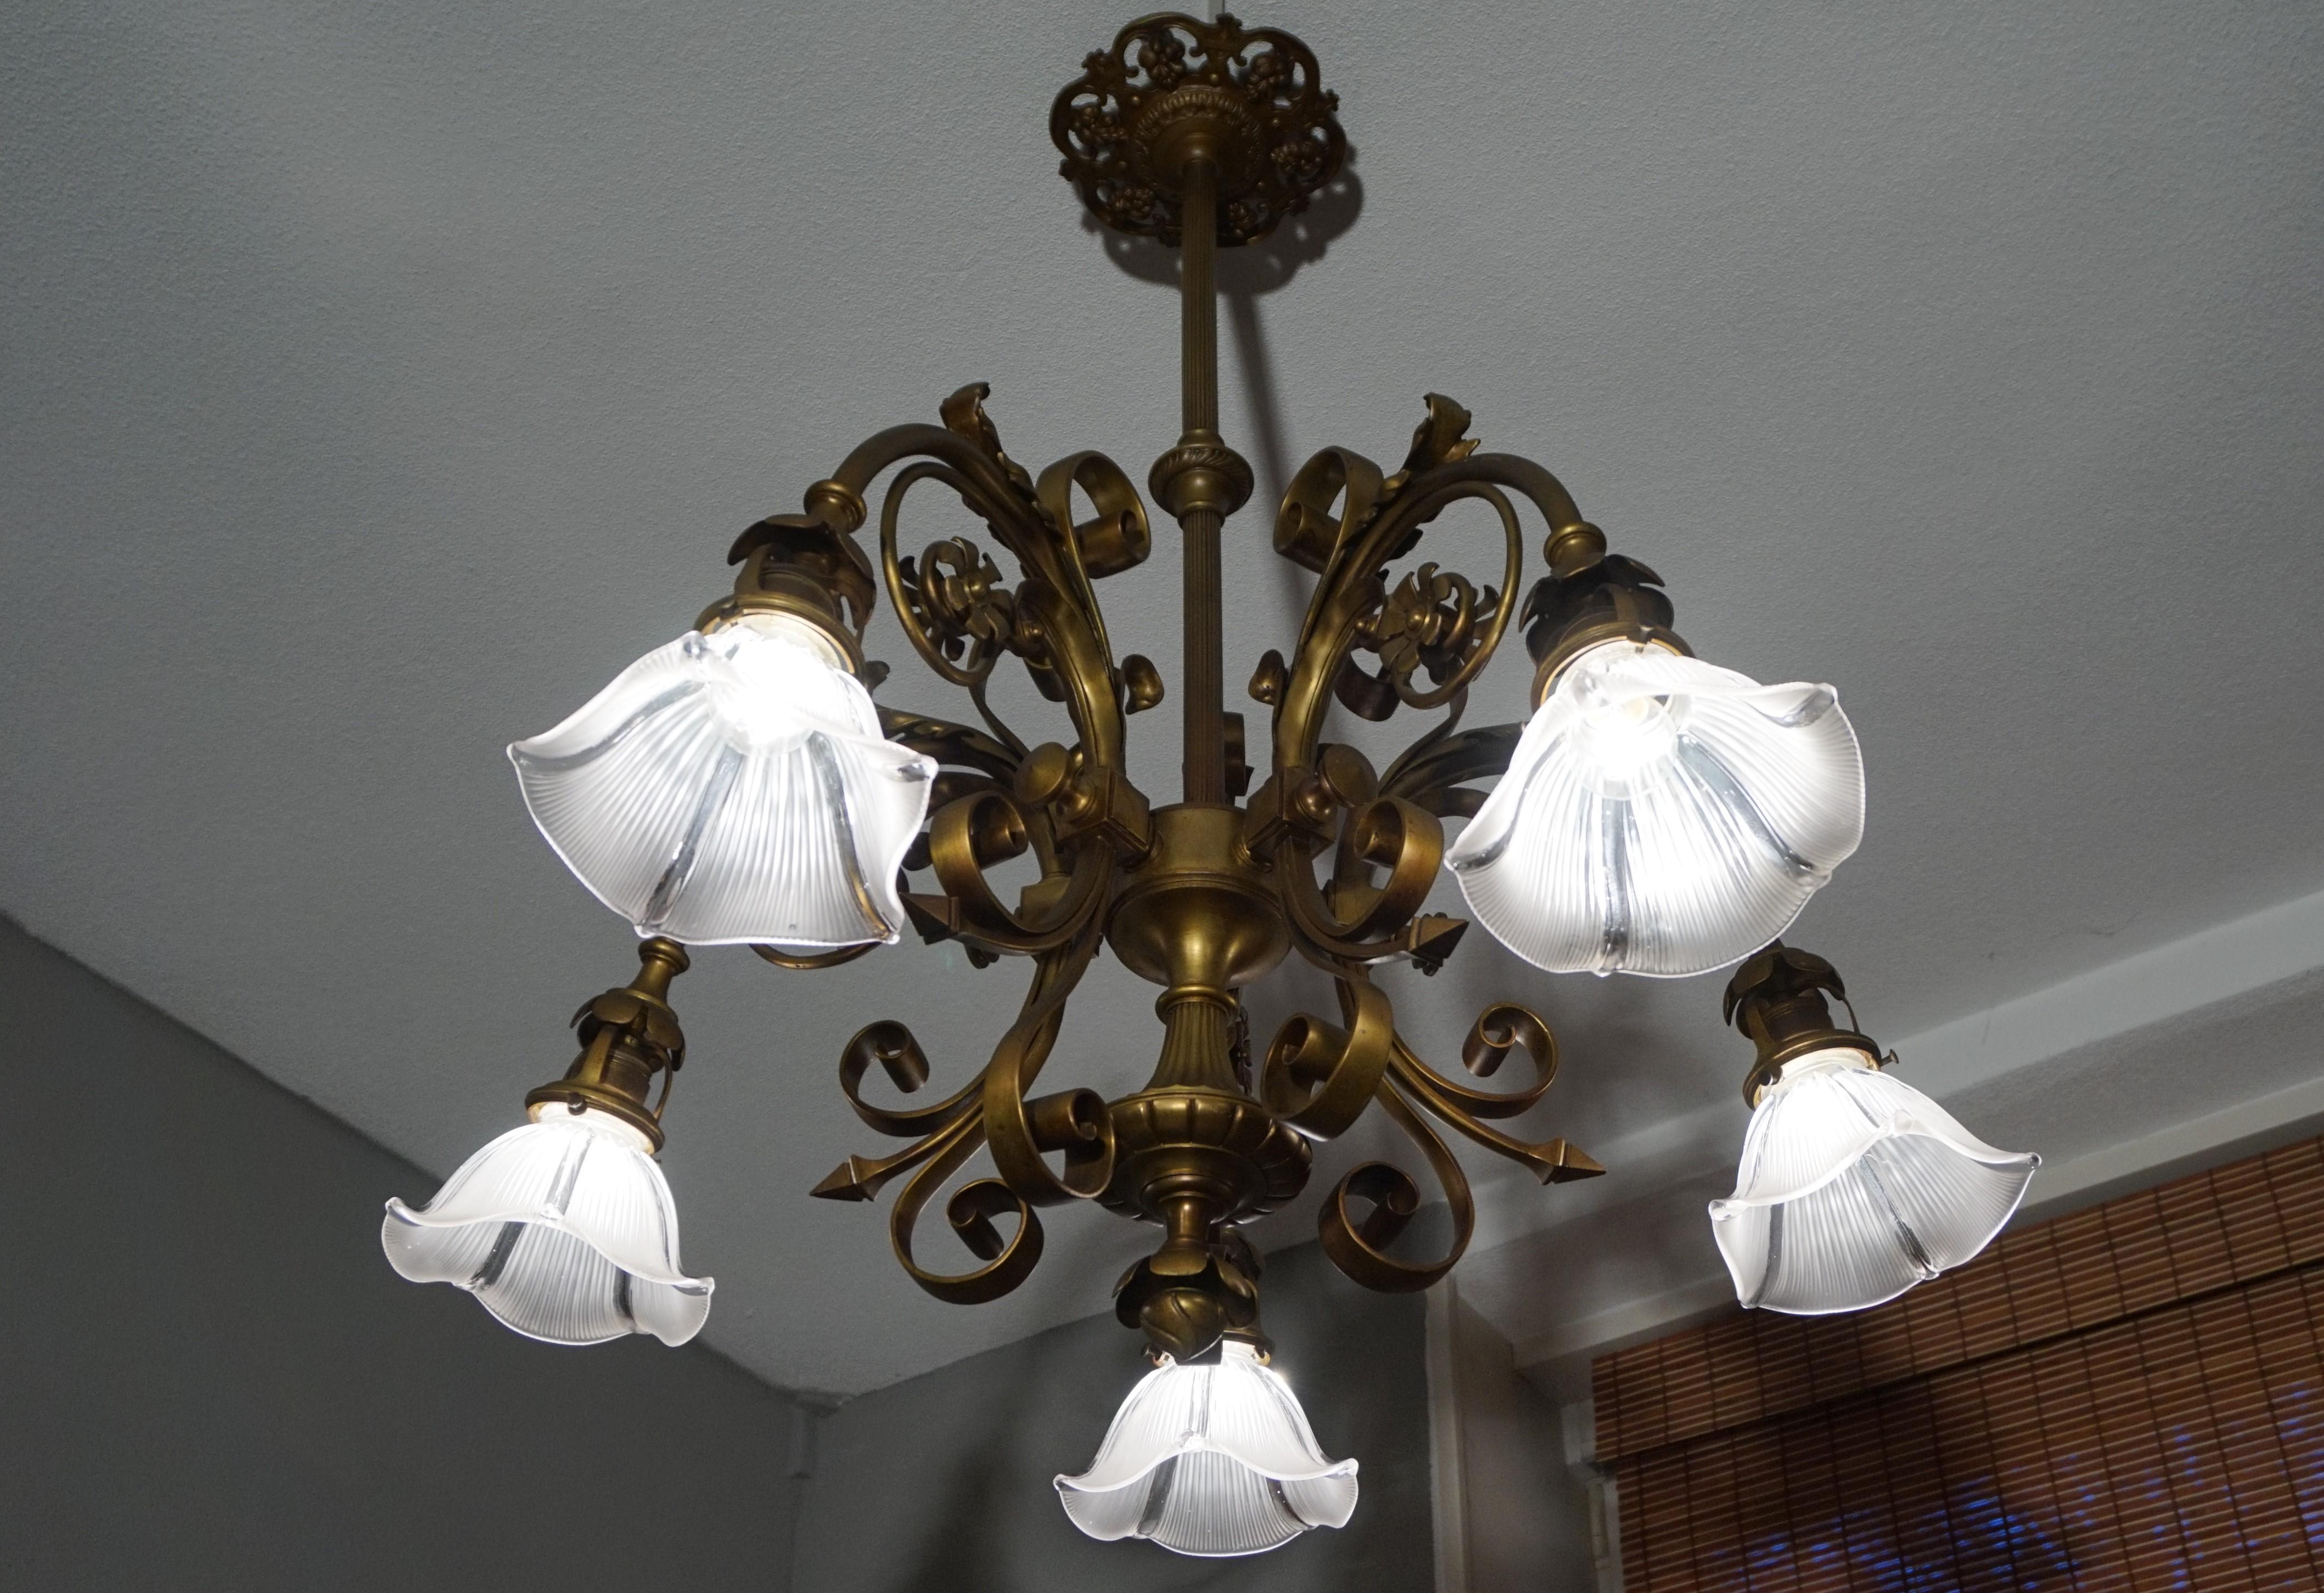 Arts and Crafts Holophane light fixture.

If you are looking for a striking and extraordinary light fixture to grace your living space then this antique, French work of lighting art could be the one for you. This handcrafted chandelier dates back to